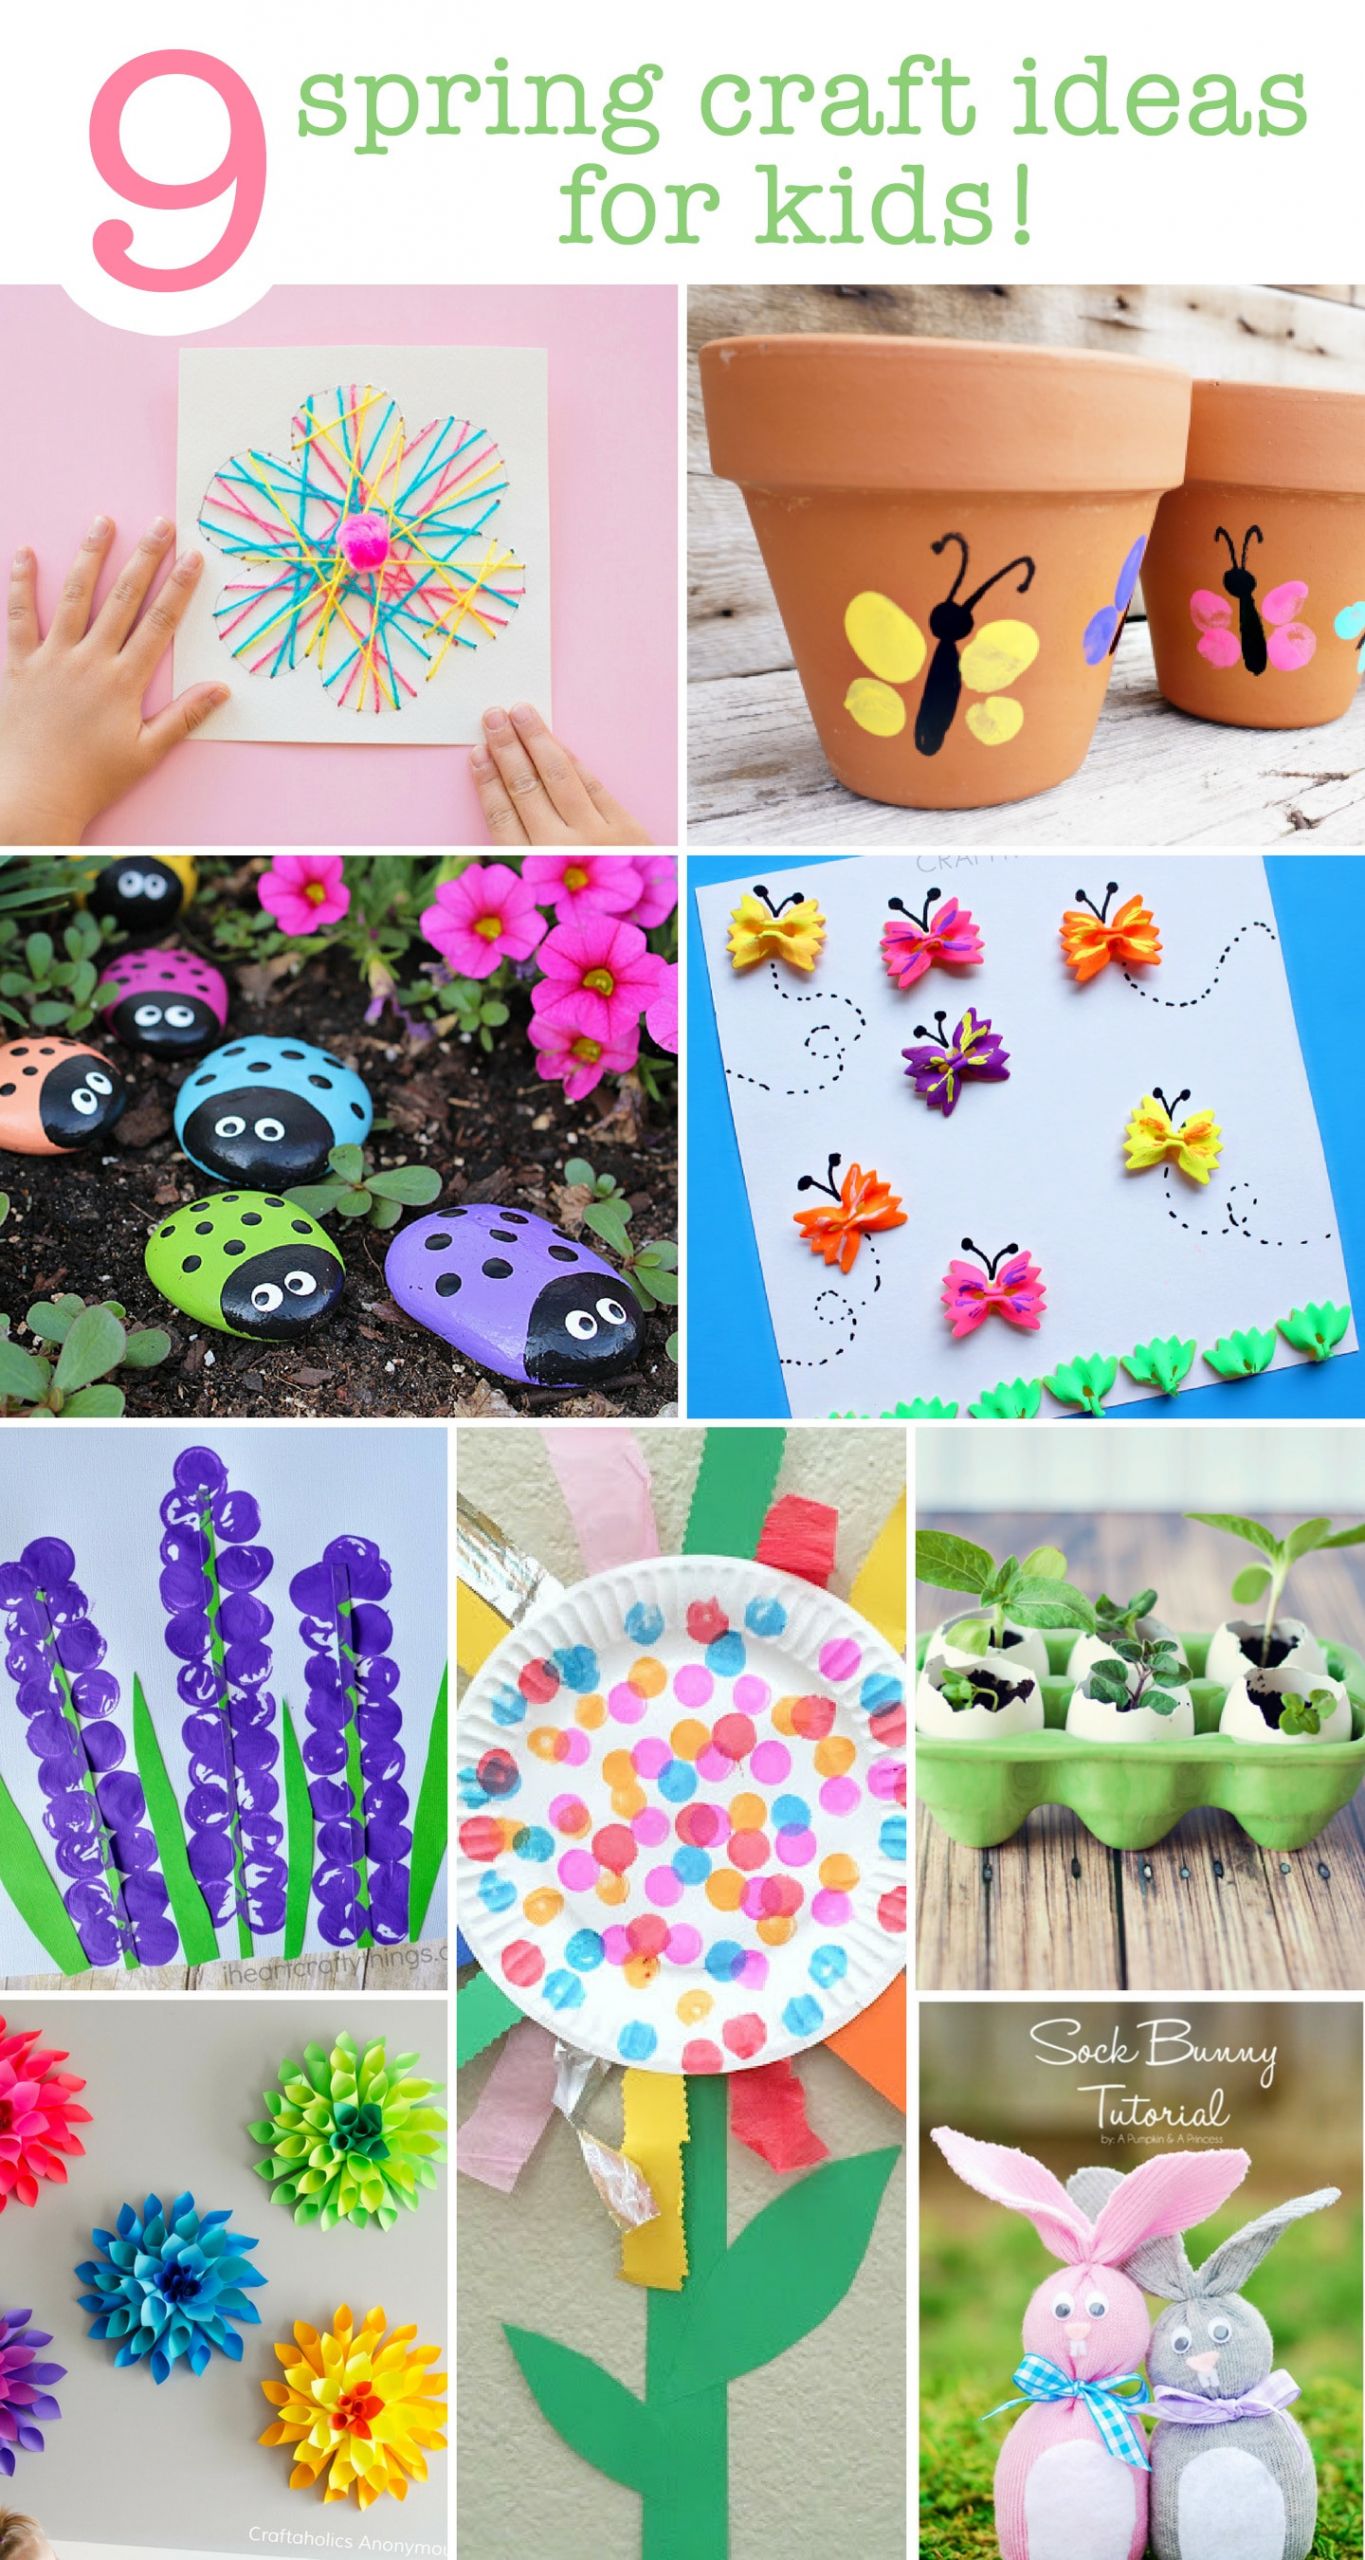 Spring Arts And Crafts For Kids
 9 Spring Craft Ideas For The Kids